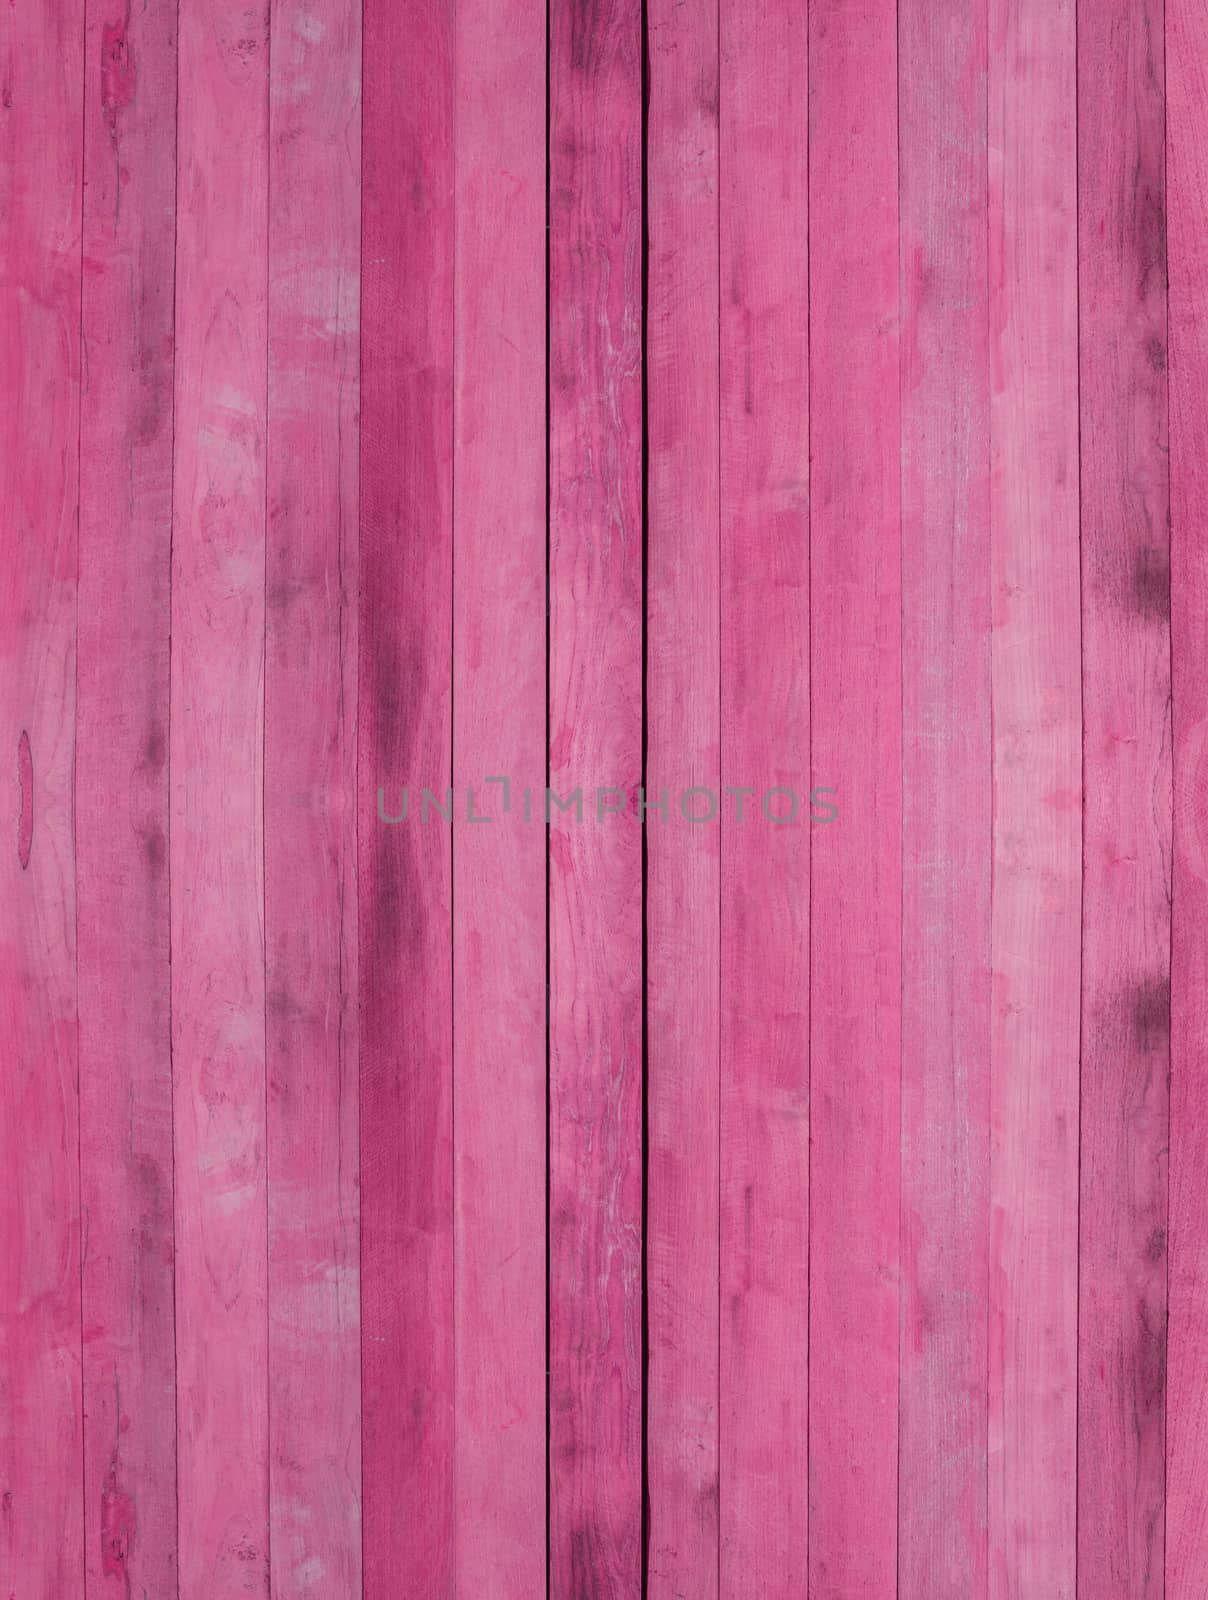 Wood texture background by nopparats